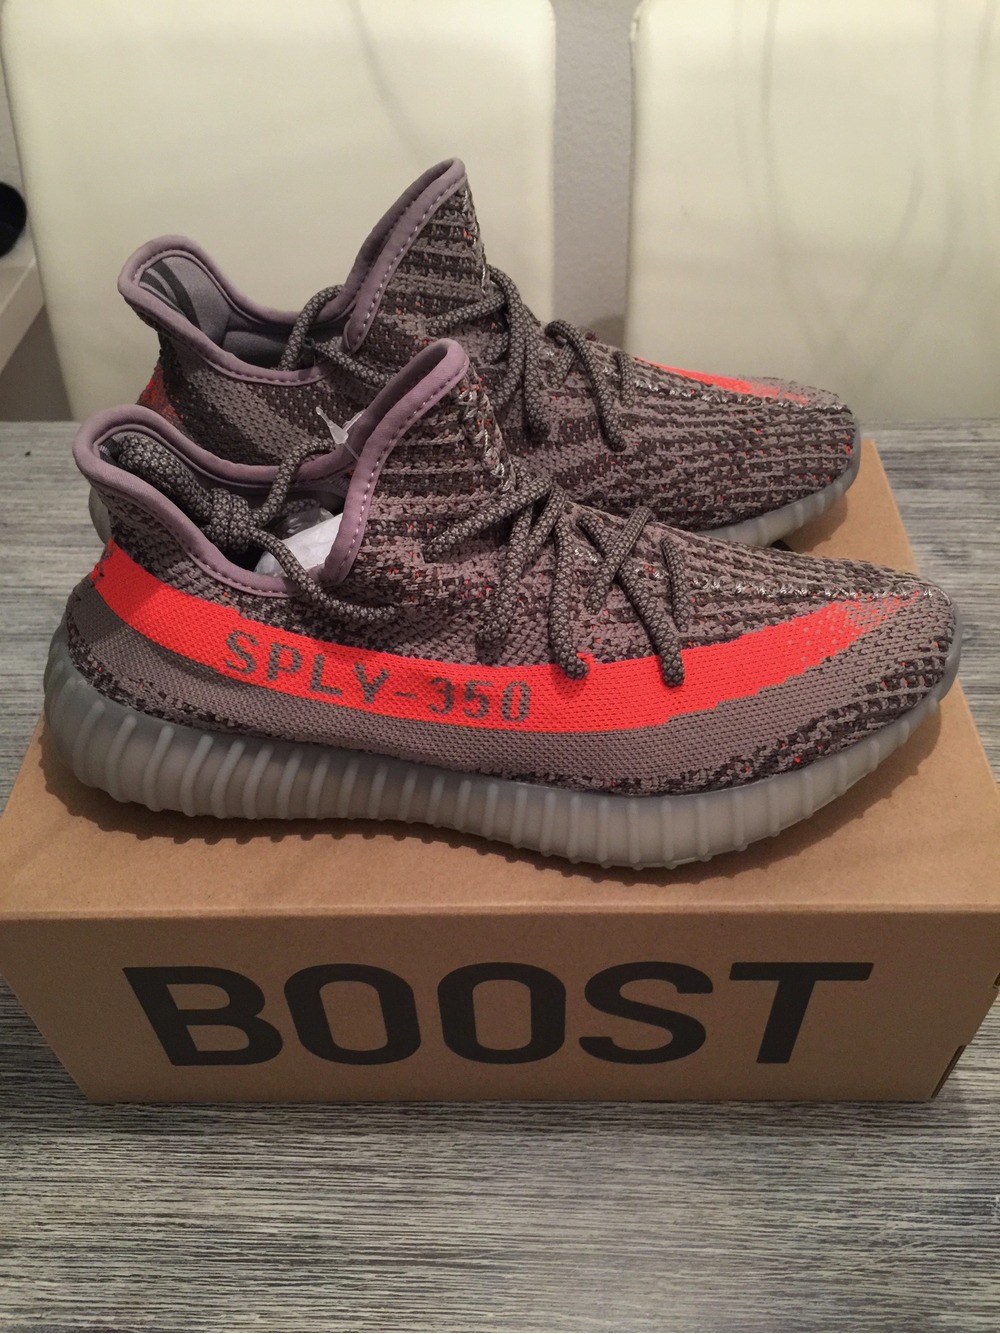 Adidas Yeezy Boost 350 V2 Zyon Size 11.5 DS Brand New 100%